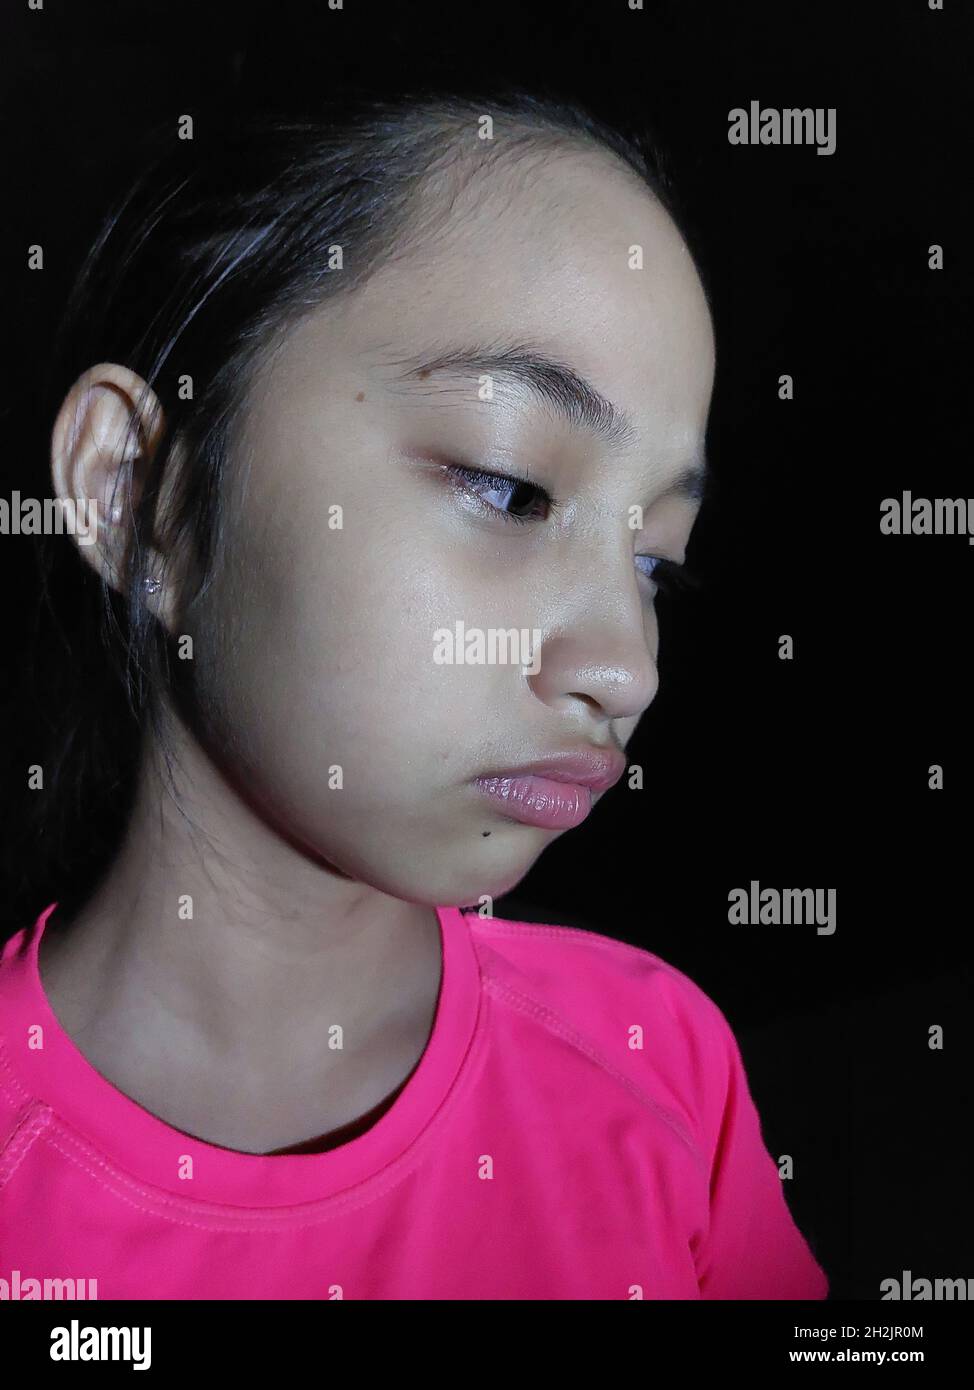 Unhappy Petite Asian Girl Child Isolated On Black Stock Photo